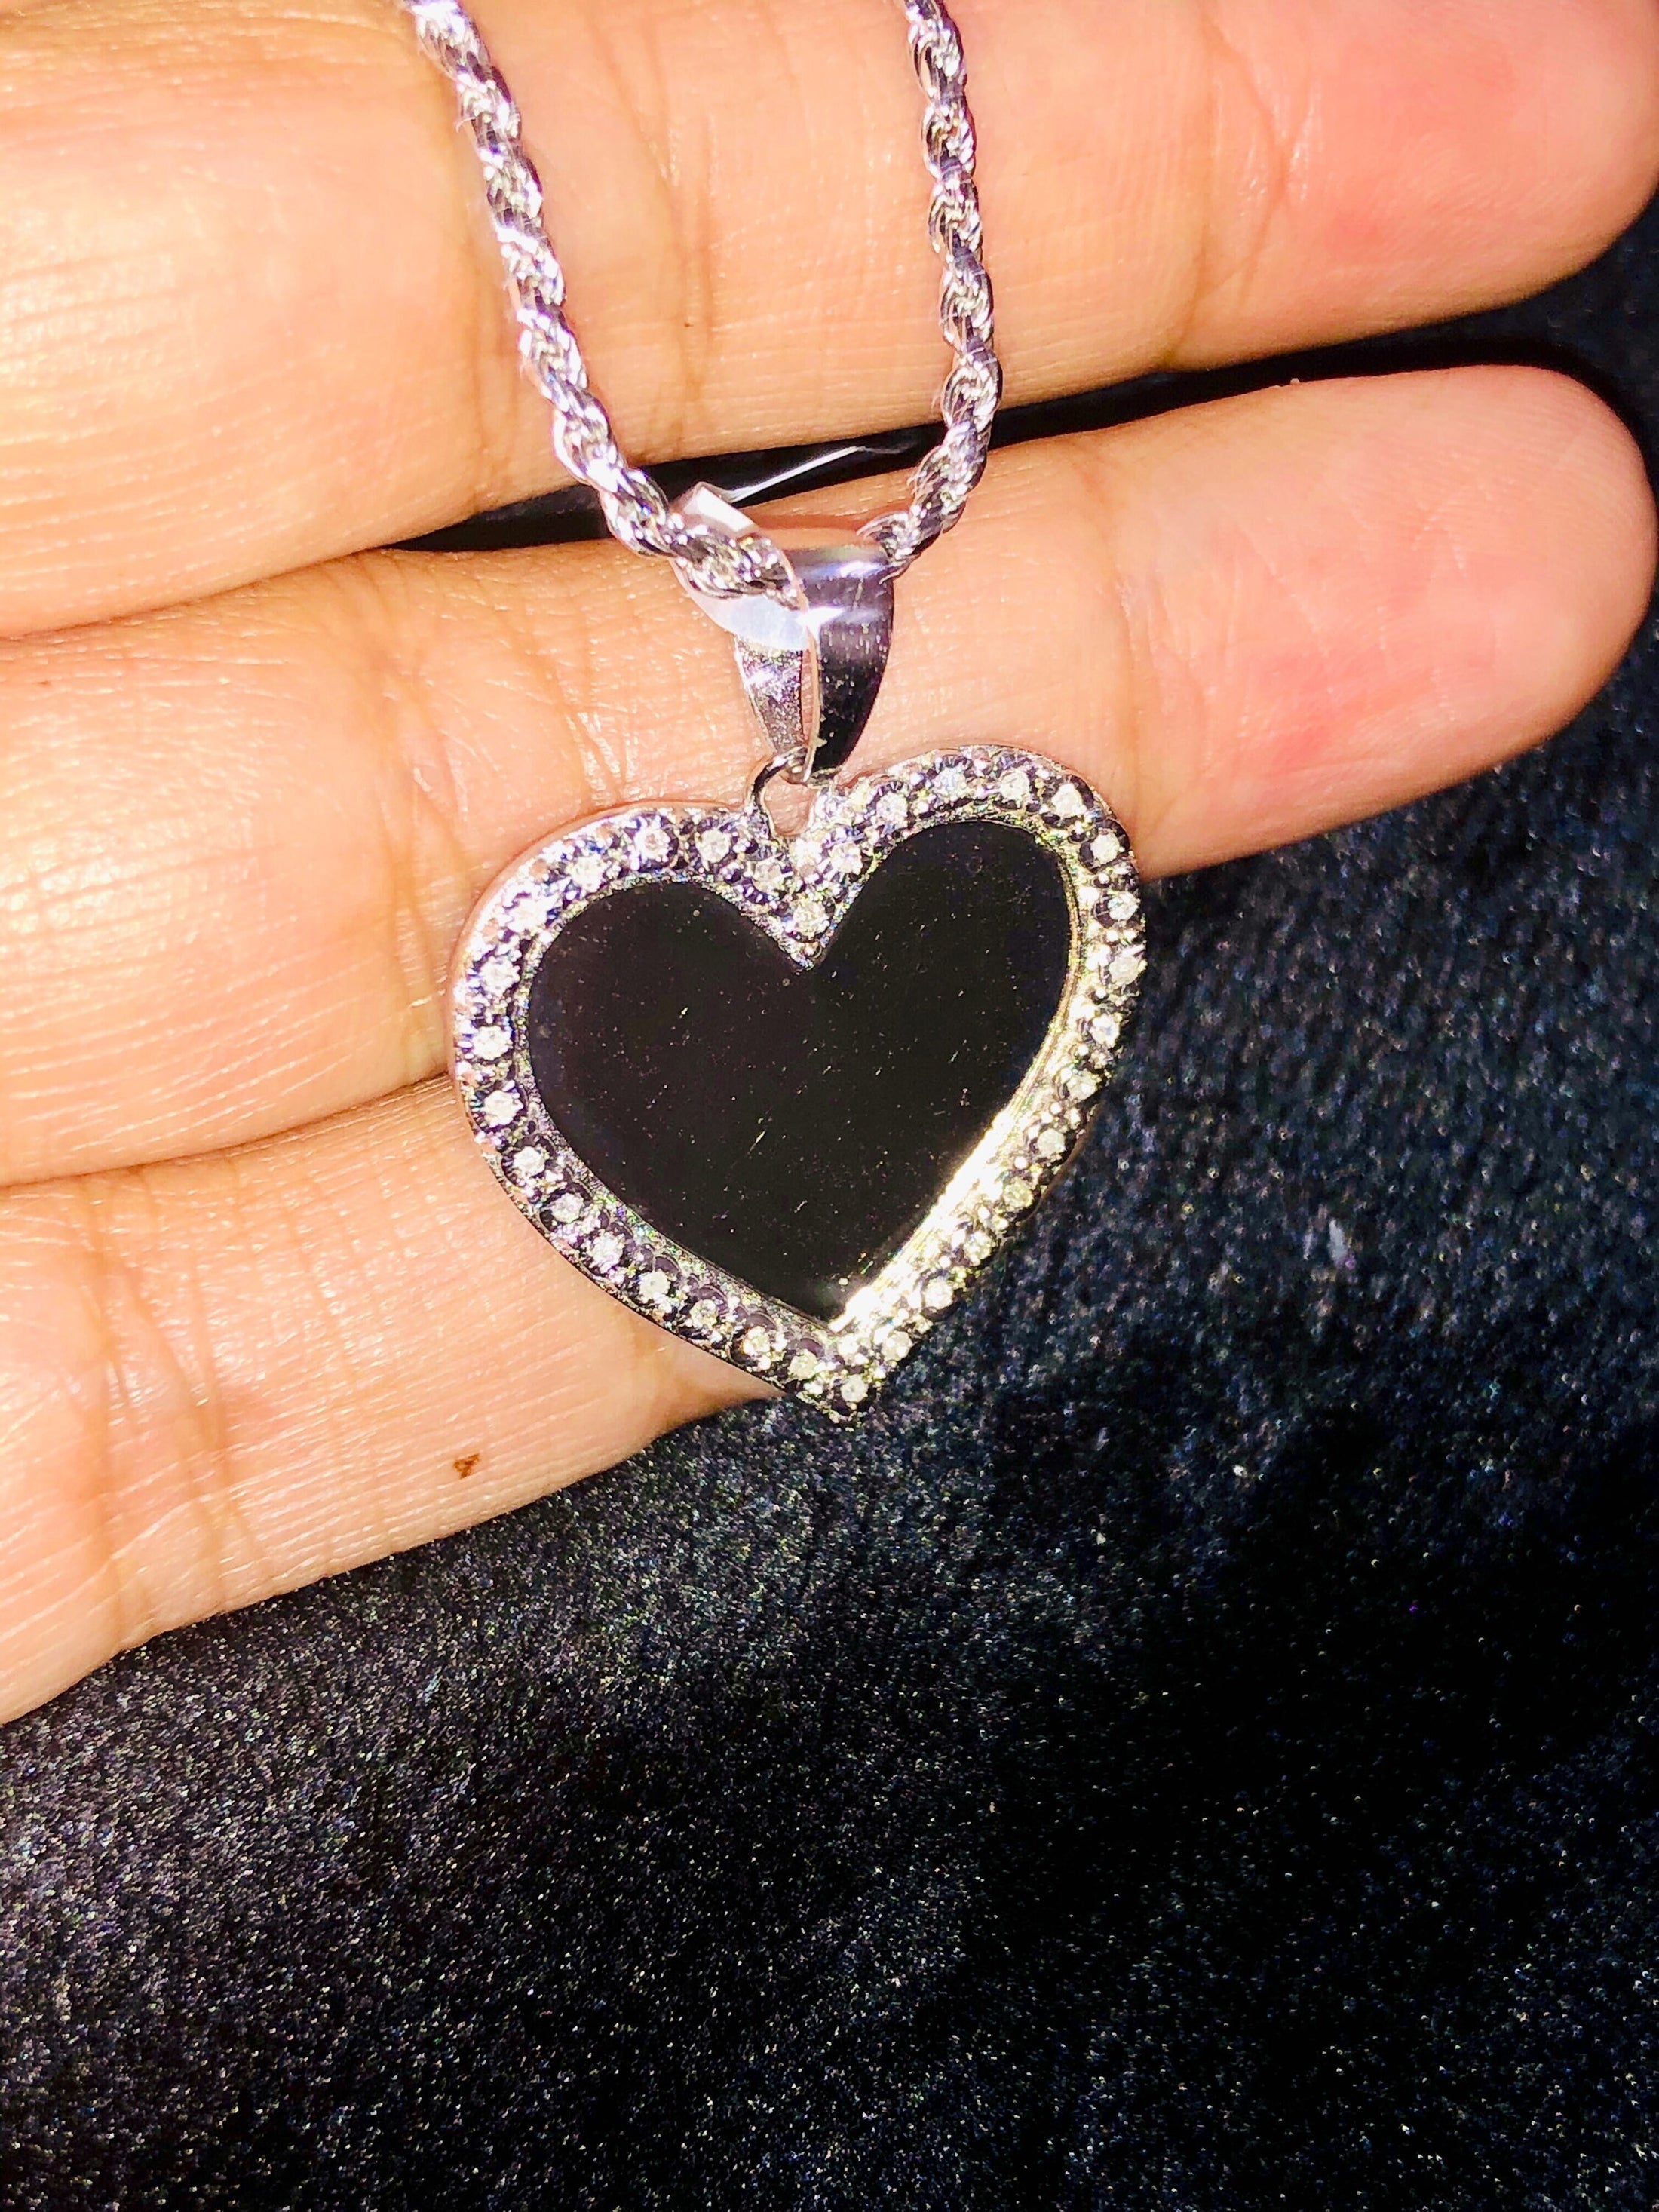 Beautiful Real Diamond Heart Memory Charm Pendant w/diamond cut solid rope chain Not CZ not plated Authenticity card & holiday gift!